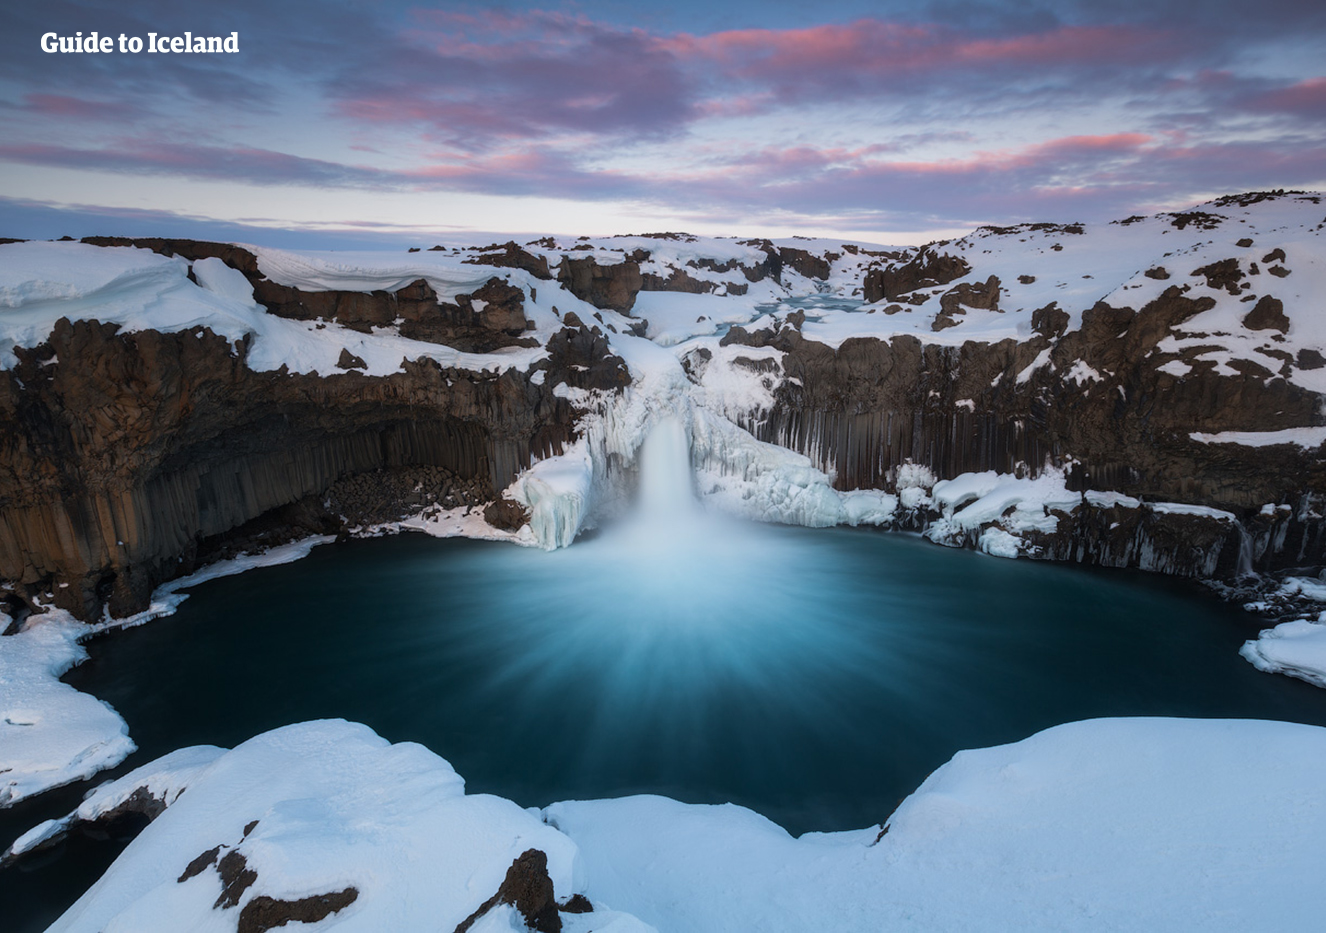 Aldeyarfoss is a waterfall located in the north of Iceland.